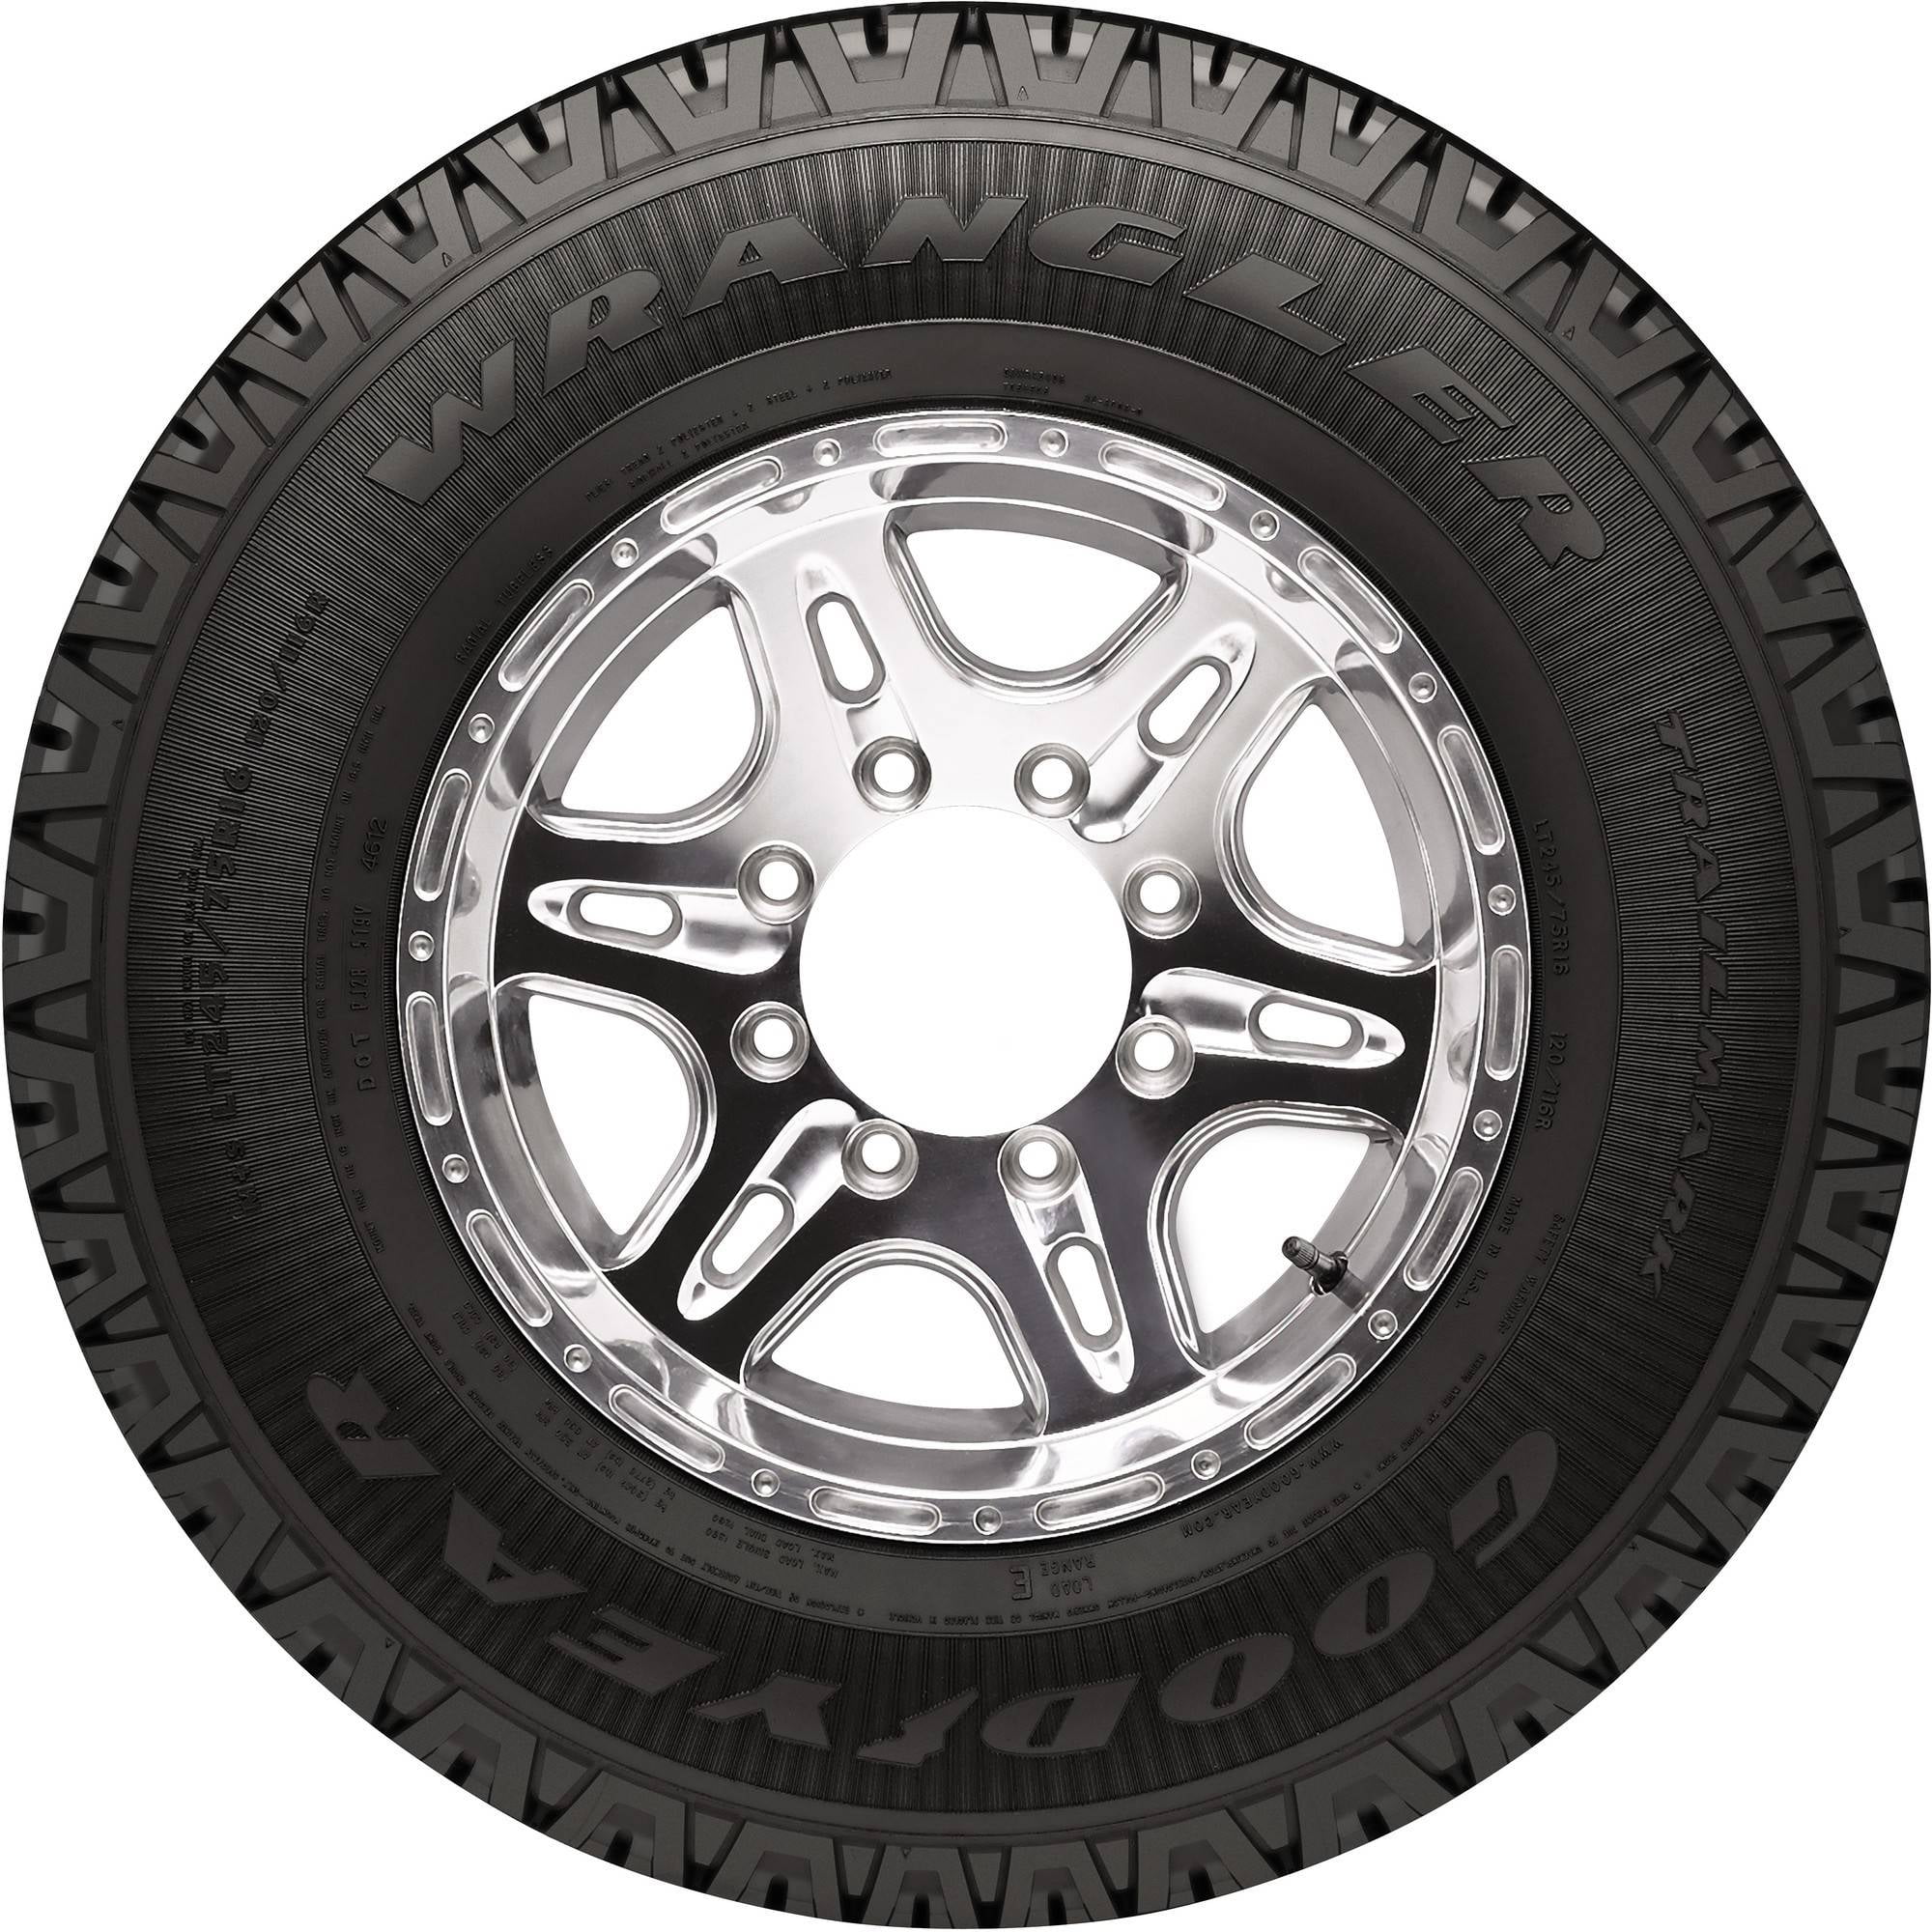 goodyear integrity p235 70r16 review